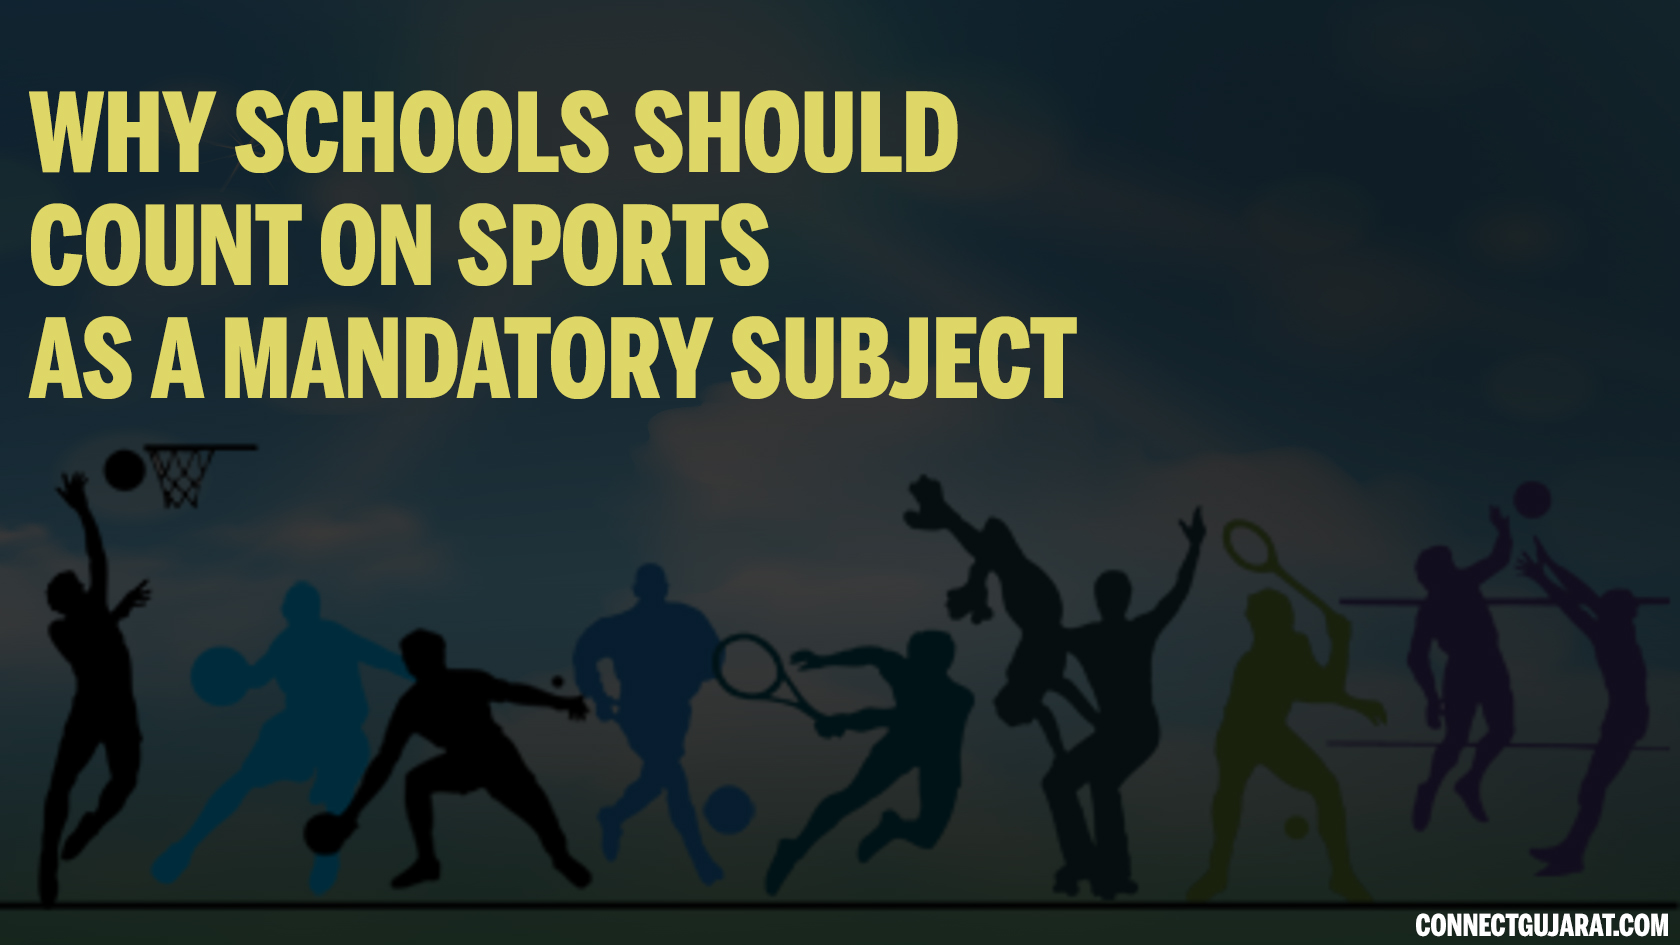 Why Schools Should Count on Sports as a Mandatory Subject